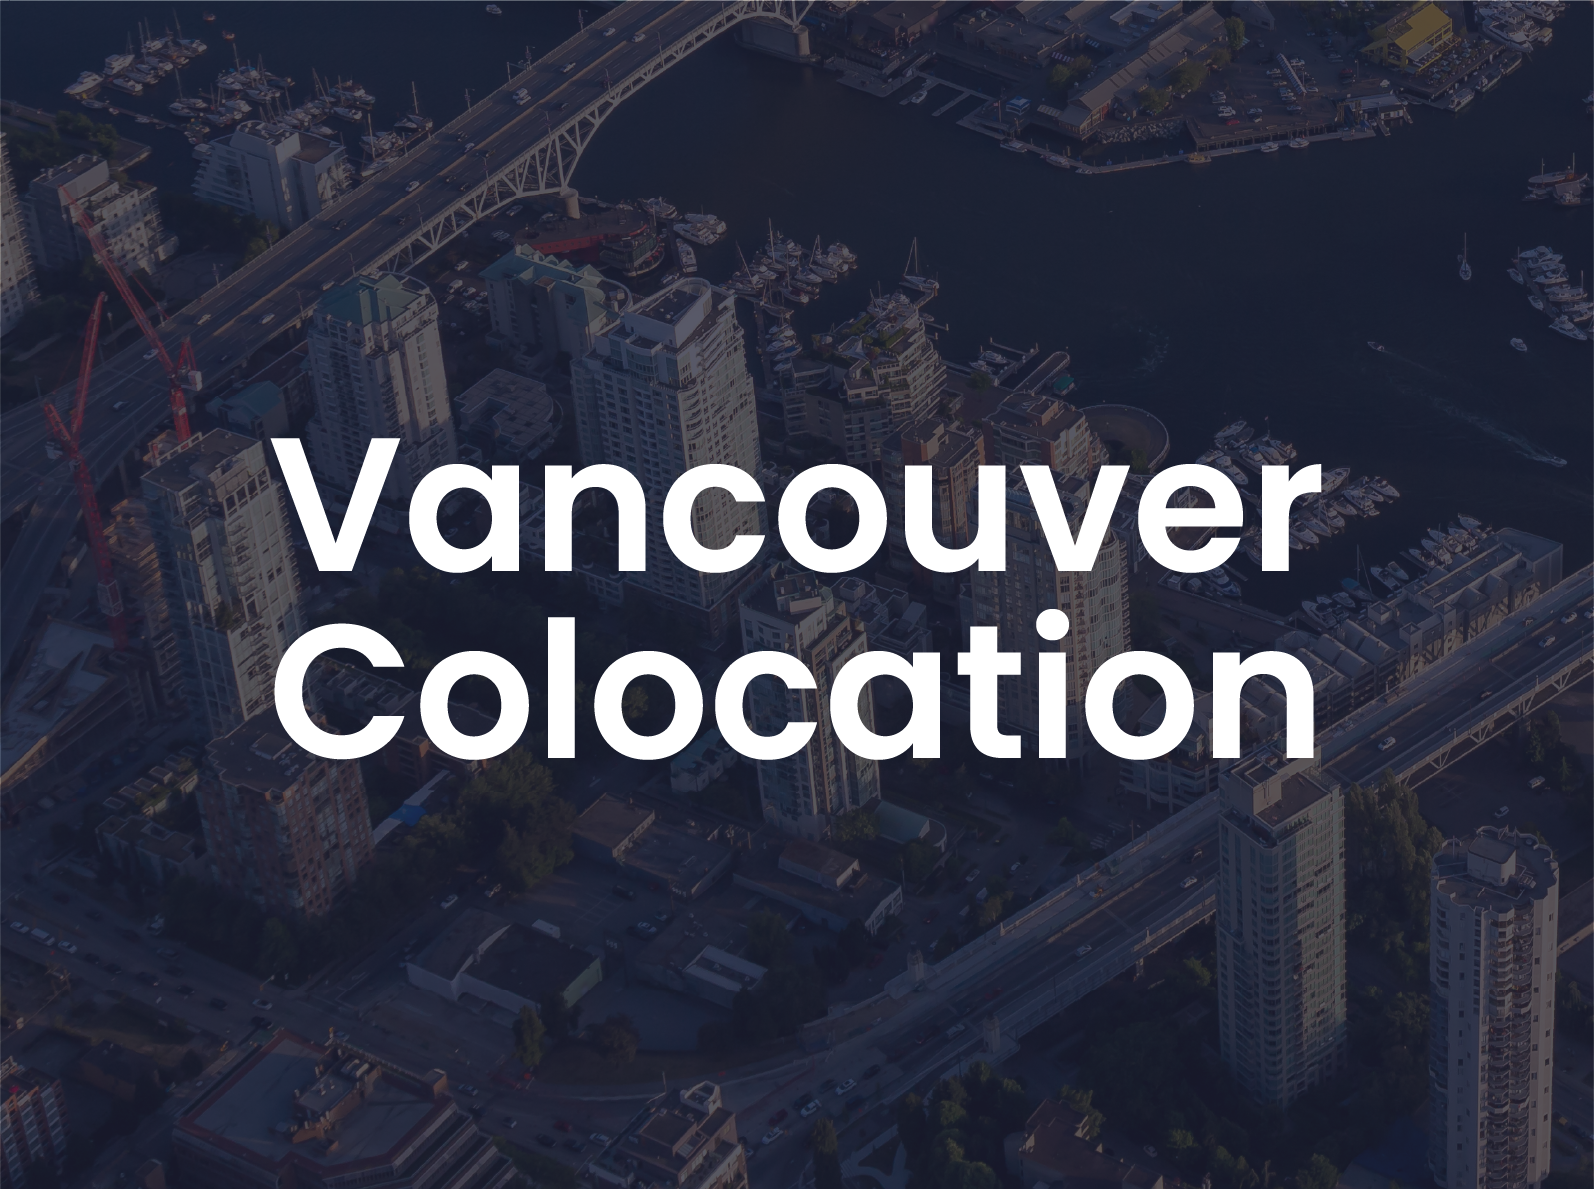 An image of a Vancouver skyline with the text "Vancouver Colocation" across it